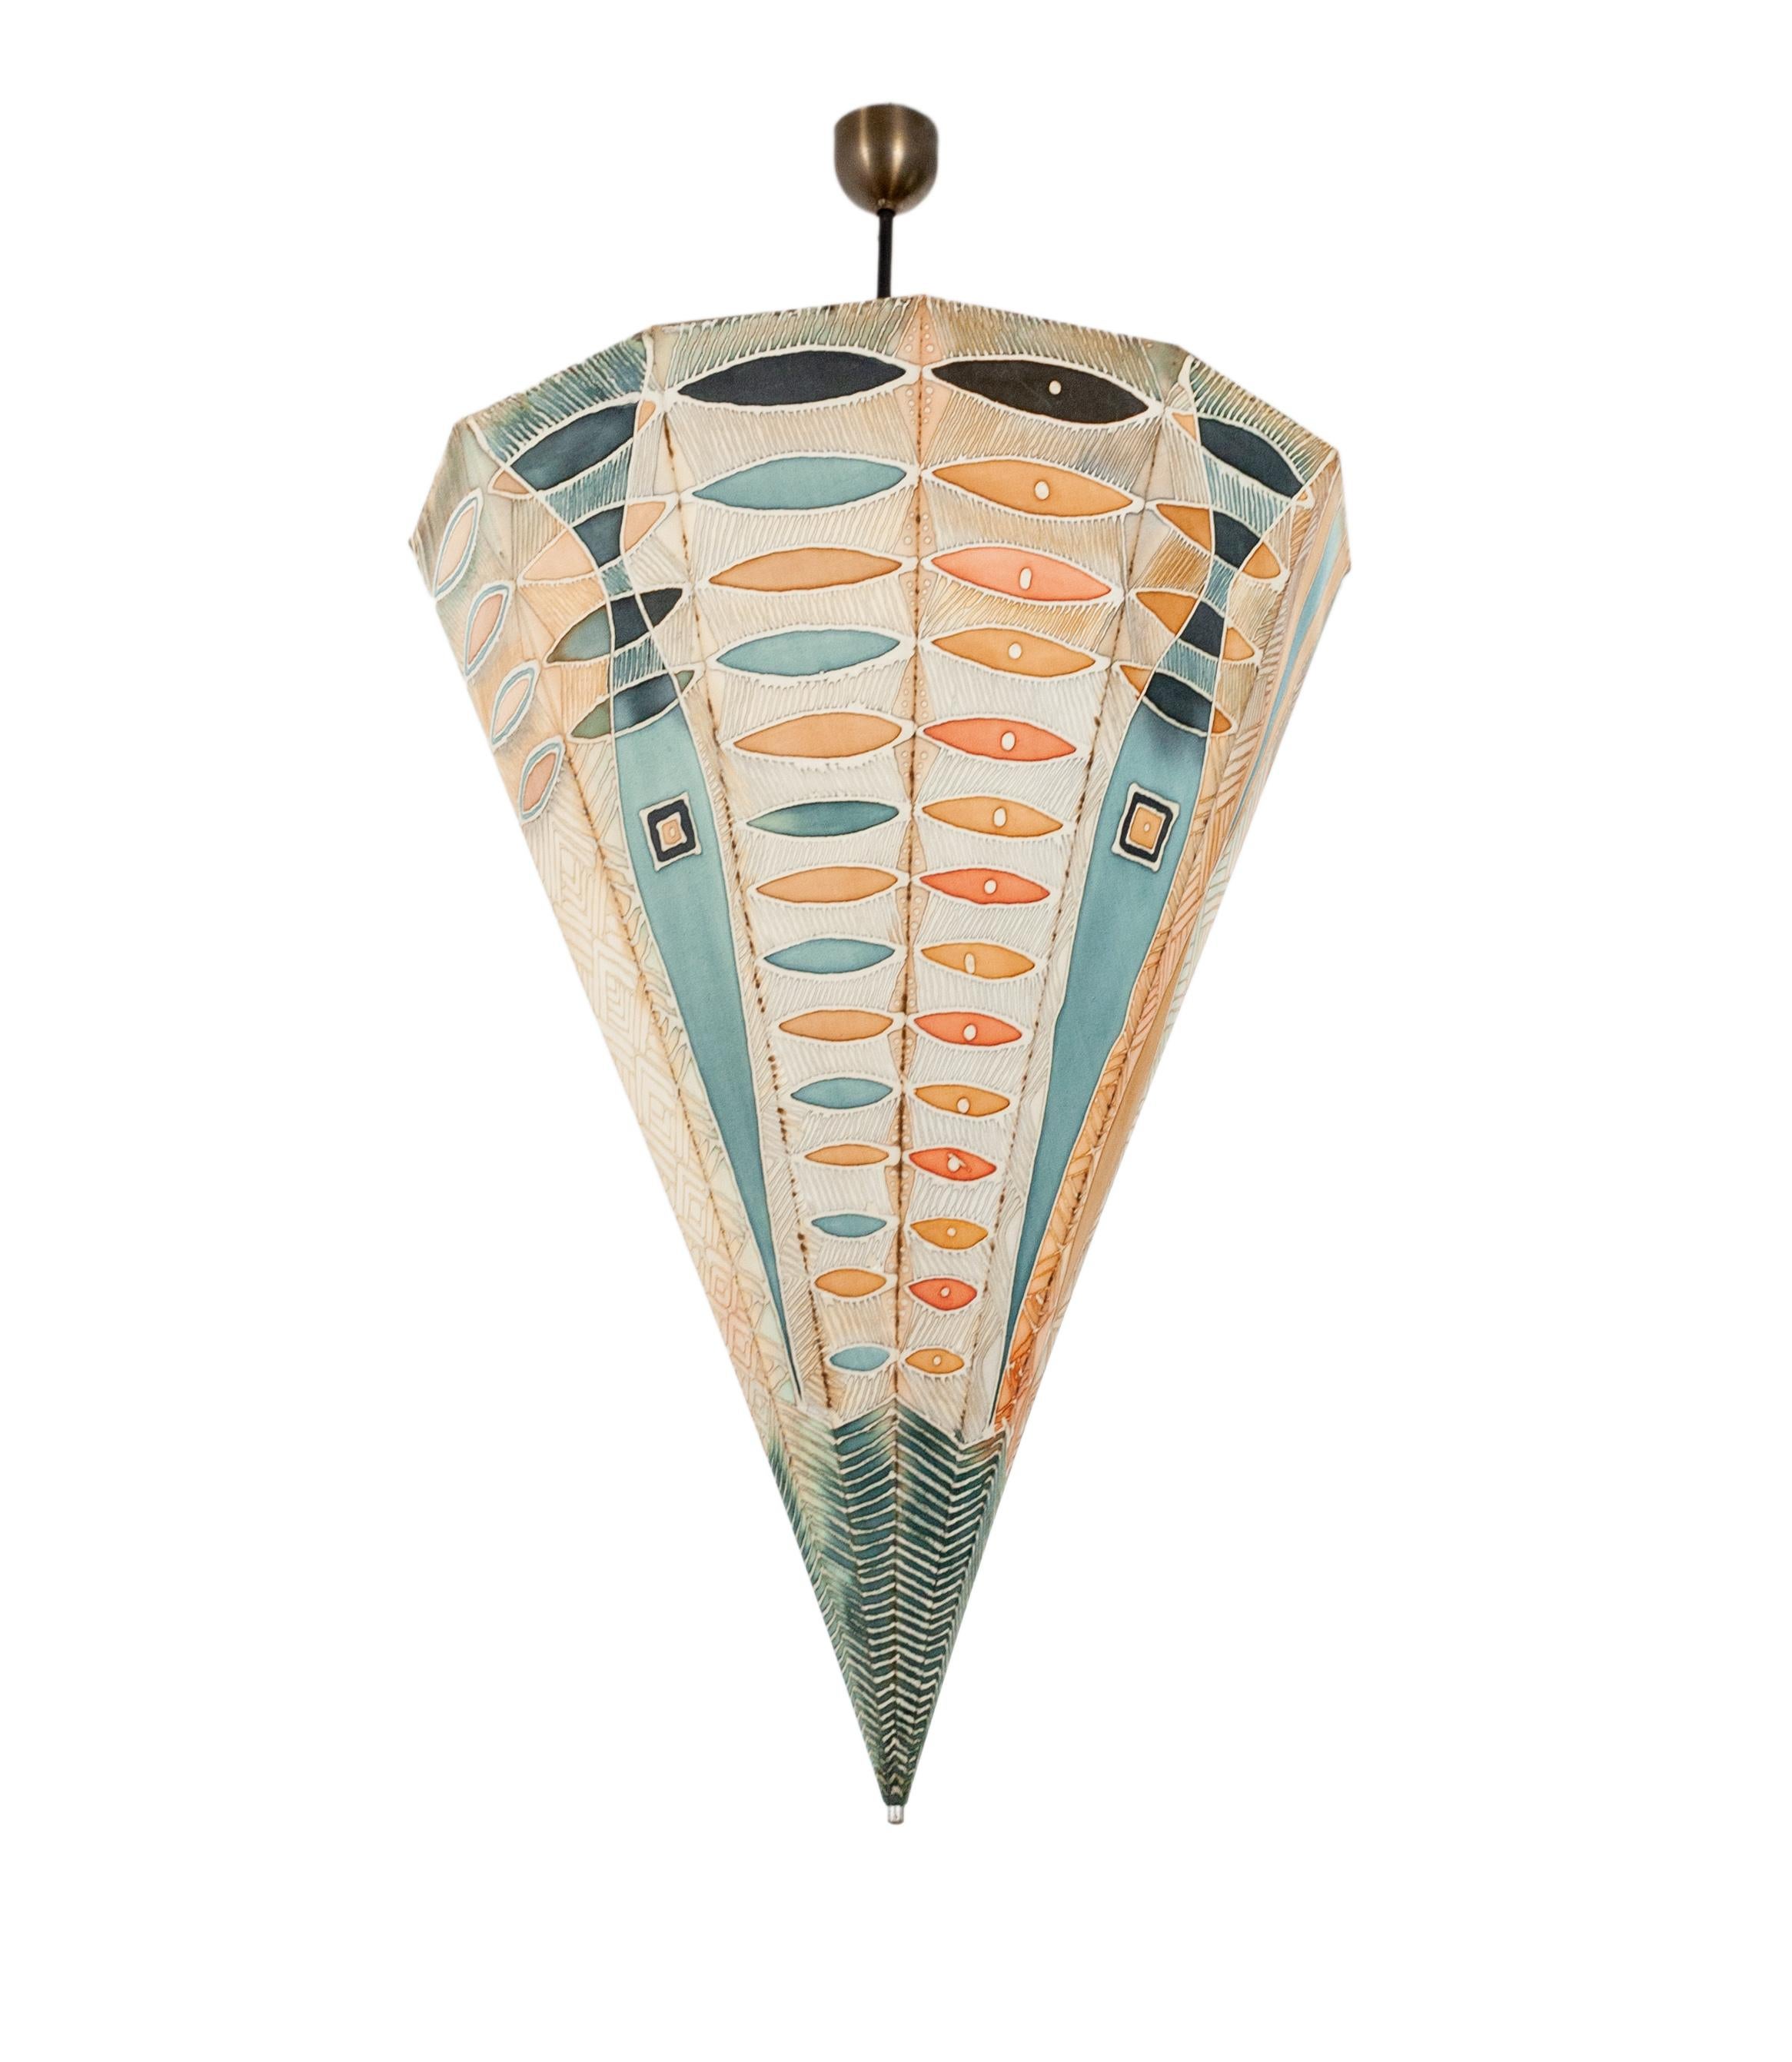 Large umbrella ceiling light. Handmade in the 1960s. Typical for that era, is the use of Batik.
The frame is made off soldered small brass tubes. Surrounded with this beautiful Batik fabric.
When lit it looks like stained windows. Looks great in a